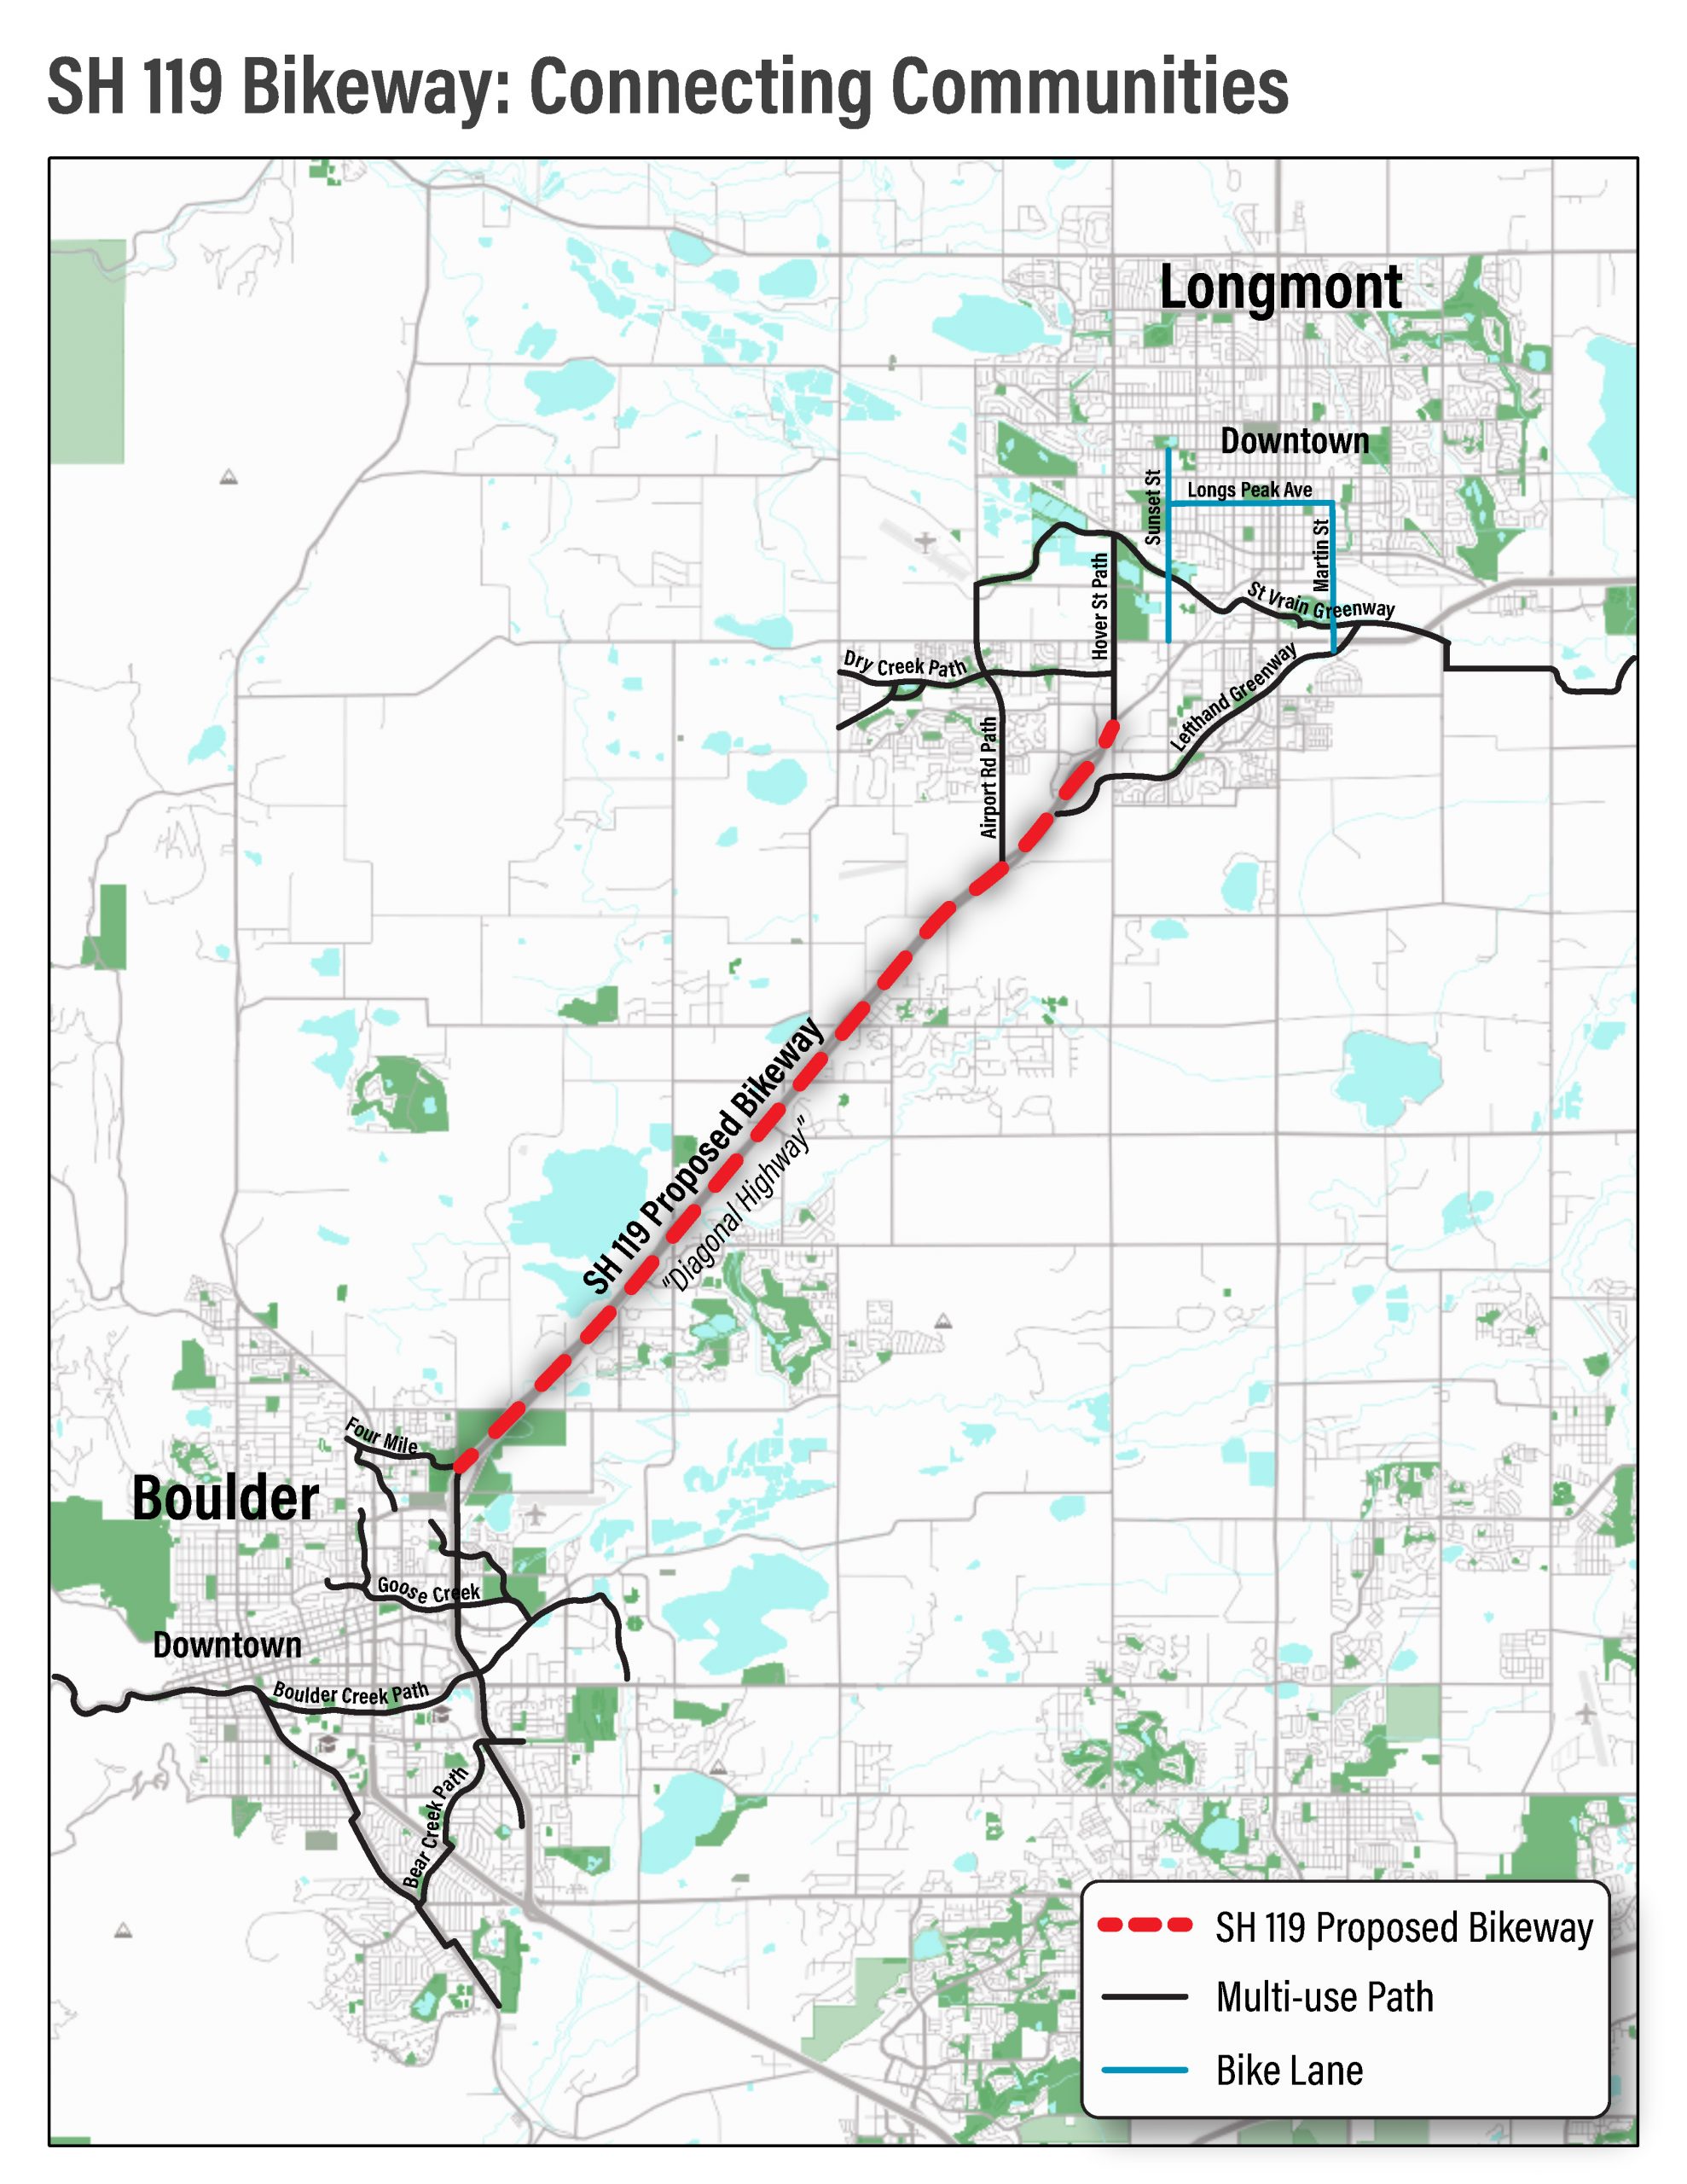 Map of SH 119 Proposed Bikeway connecting Boulder and Longmont